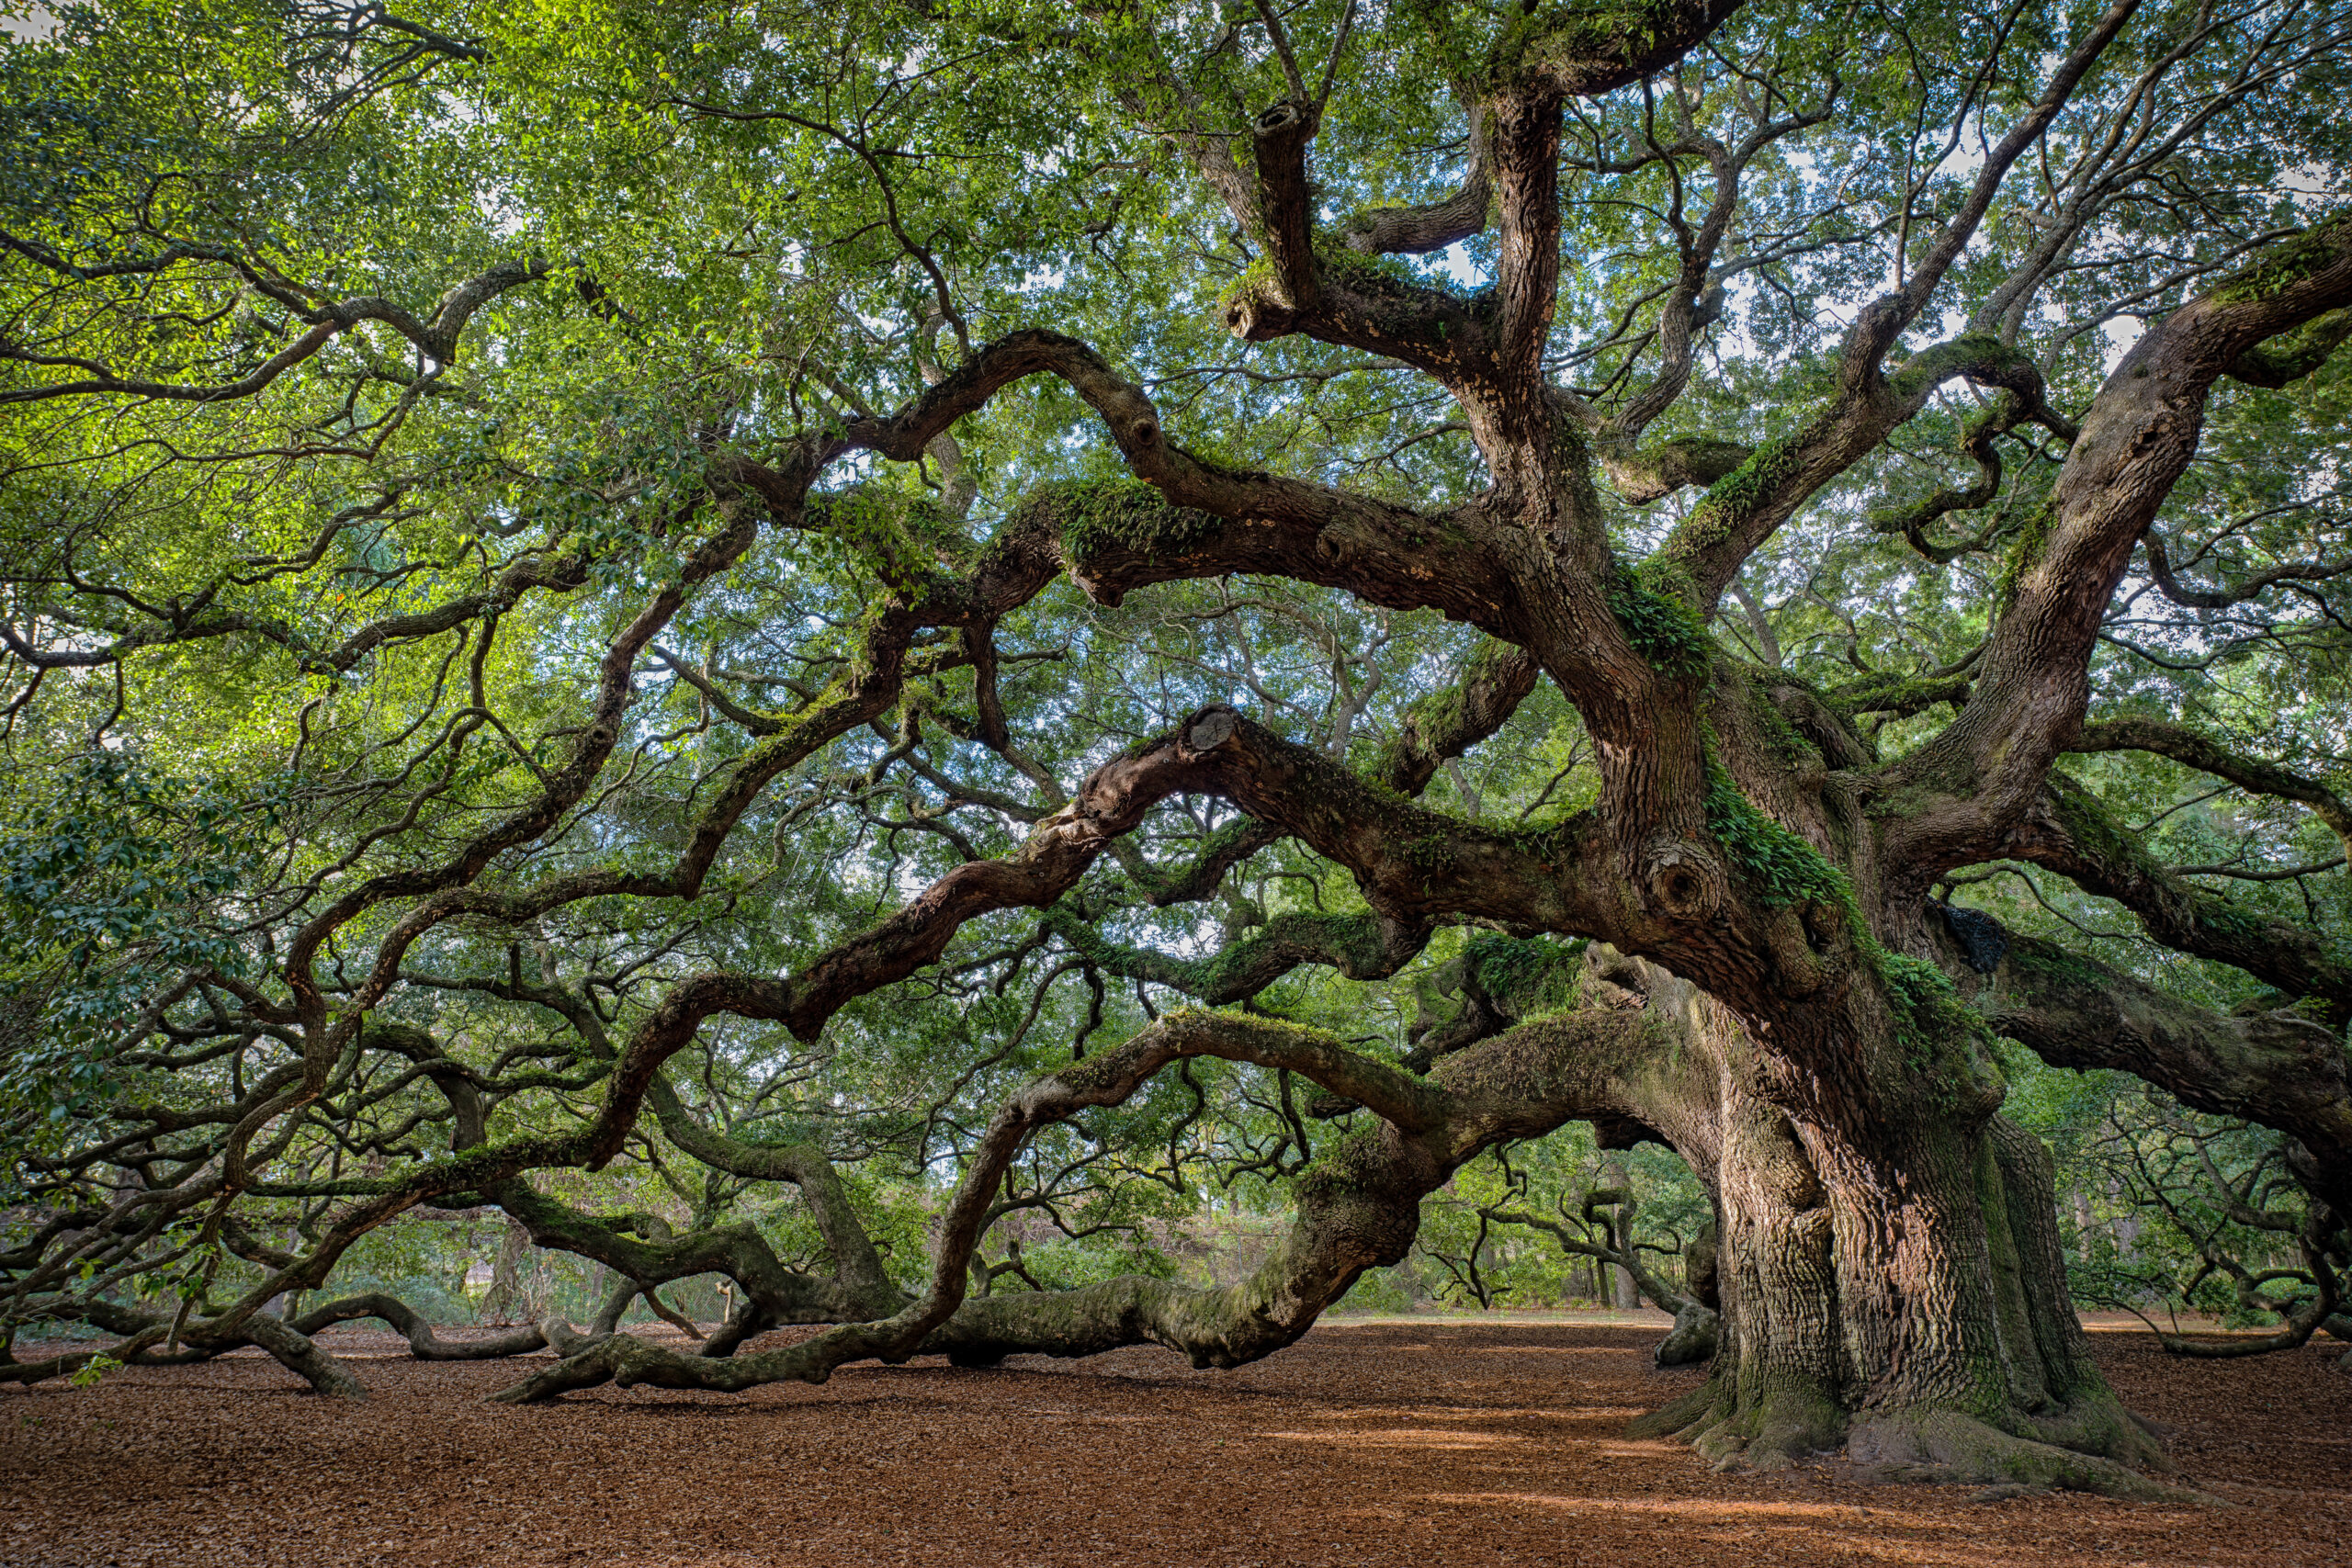 The Angel Oak Tree is a Southern live oak (Quercus virginiana) located in Angel Oak Park on Johns Island near Charleston, South Carolina on December 8, 2014. The Angel Oak Tree is estimated to be at least 400 and possibly up to 1400 years old. It stands 66.5 feet tall, measures 28 feet in circumference, and produces shade that covers 17,200 square feet. Its longest branch distance is 187 feet in length.